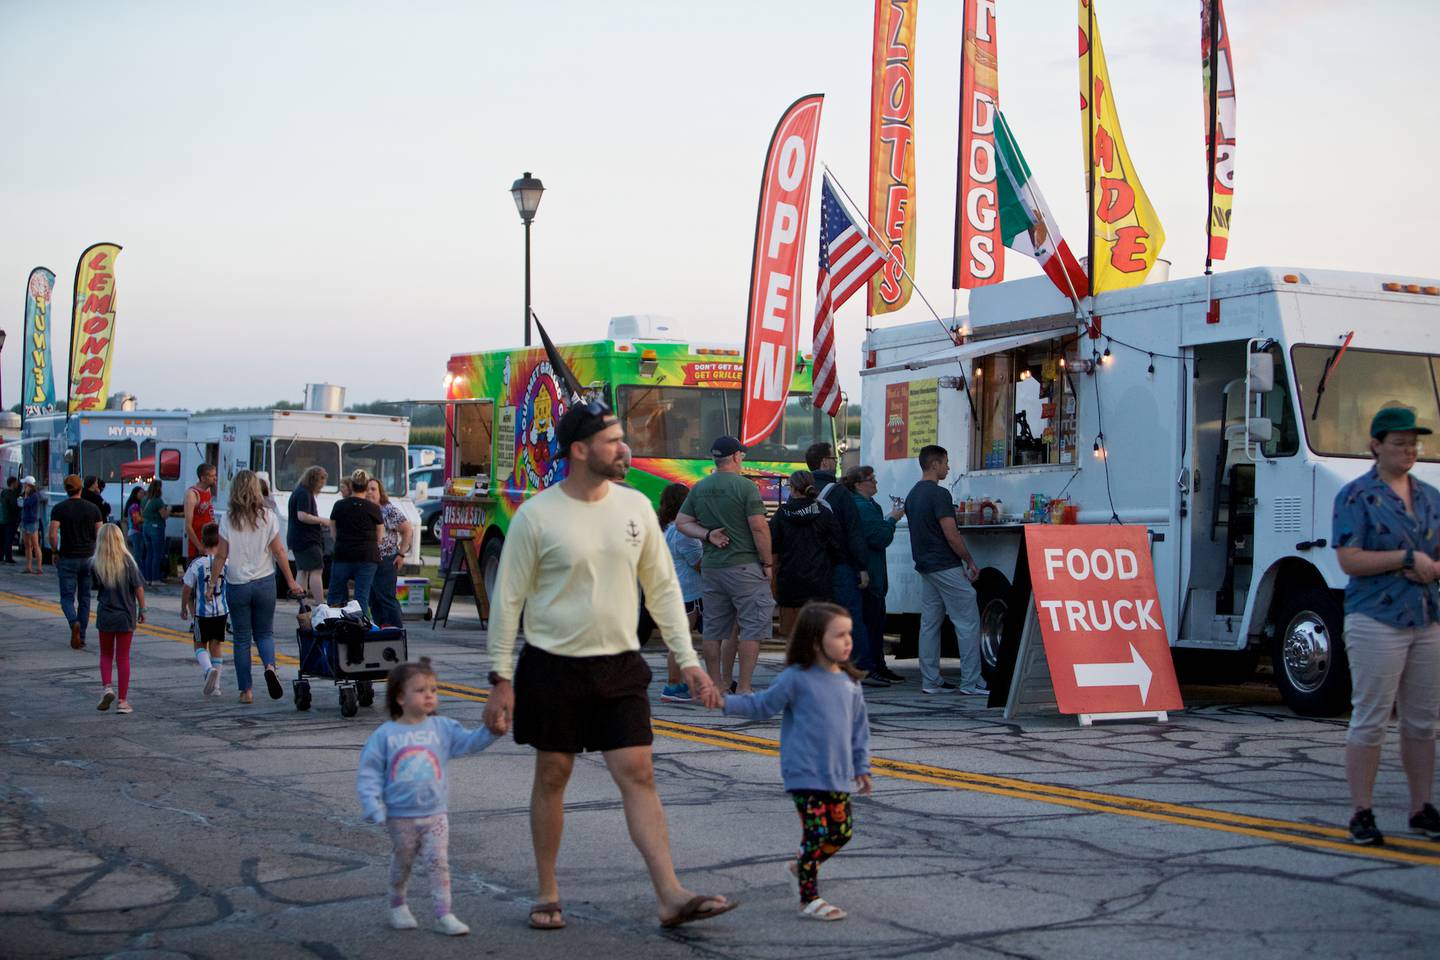 Locals gather for fireworks and enjoy the food trucks at Engstrom Park in Batavia on Saturday, August 5, 2023